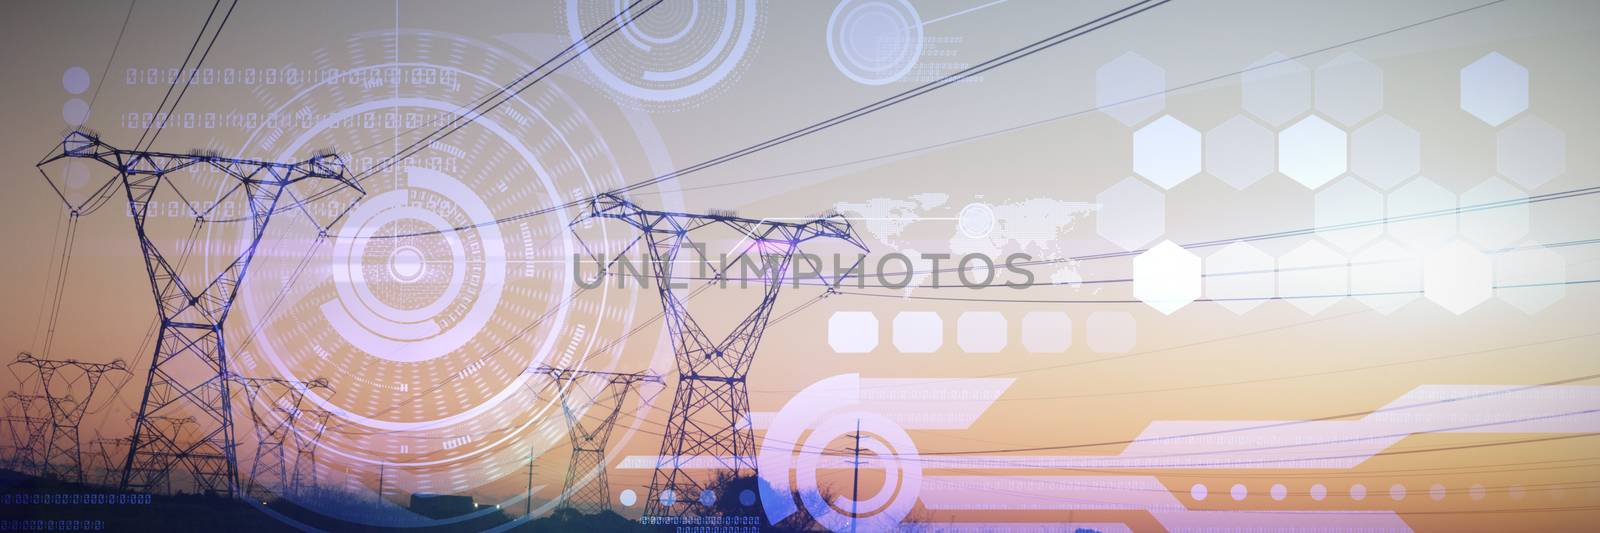 The evening electricity pylon silhouette against futuristic technology interface